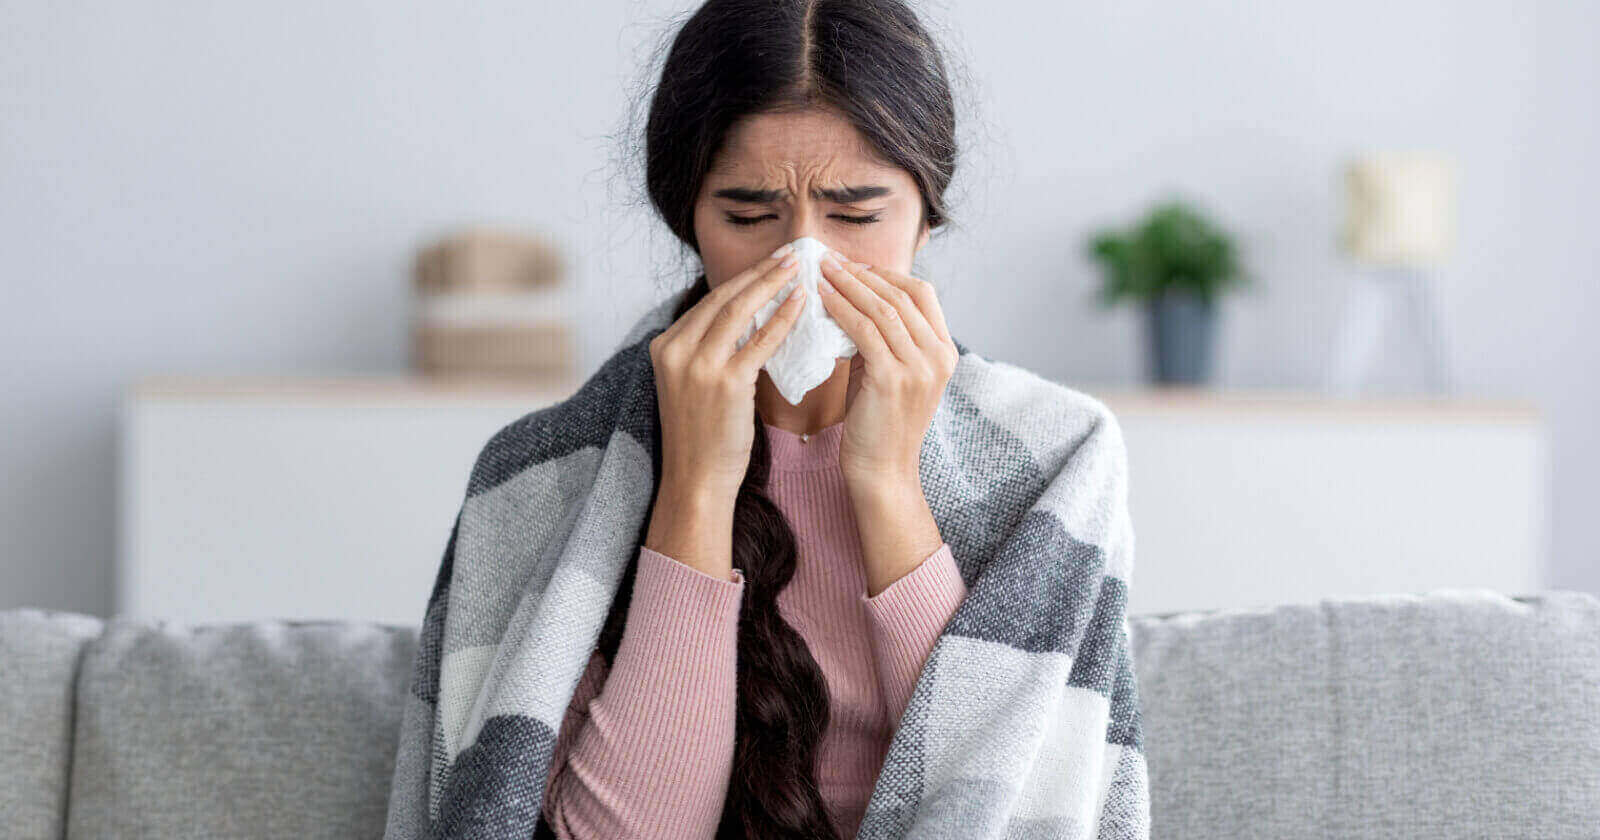 RUNNY NOSE: Definition, Symptoms, Causes & Treatment